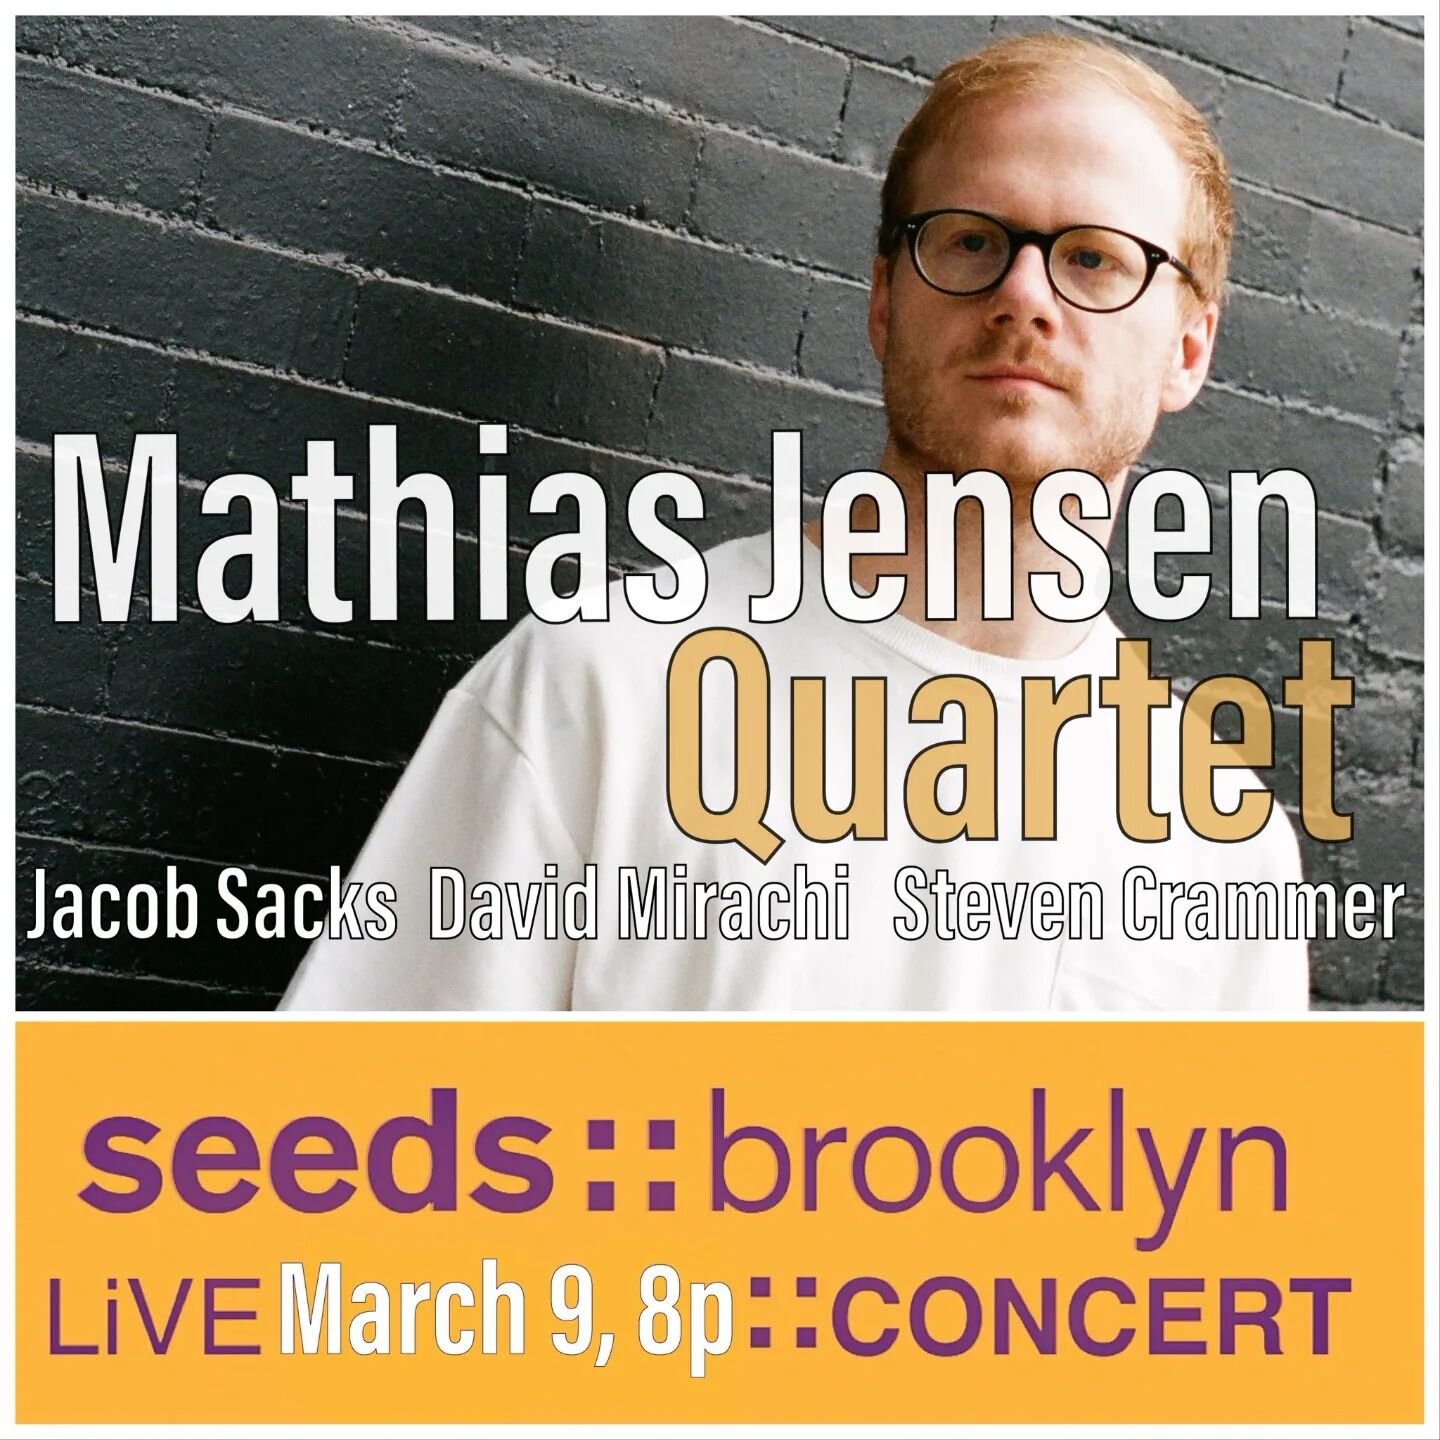 In 2 days, I will be playing a show at @seedsbrooklyn, one of my favorite Brooklyn venues, to celebrate the release of my debut record: 'Is As Is'! 

The record itself is coming out tomorrow, March 8th and will be available on all streaming services 